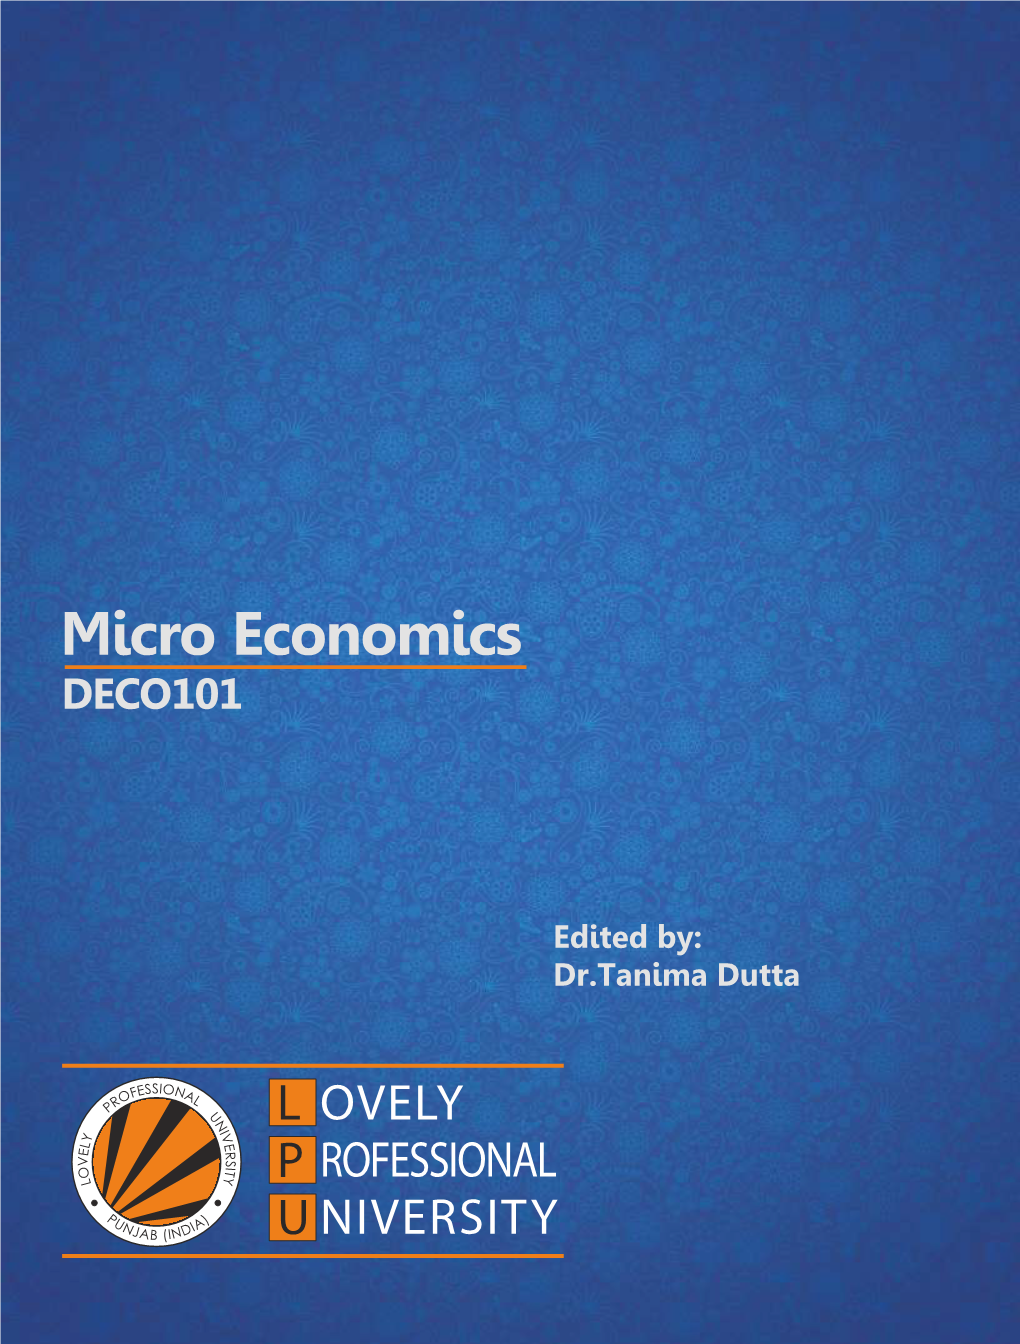 MICRO ECONOMICS Edited by Dr